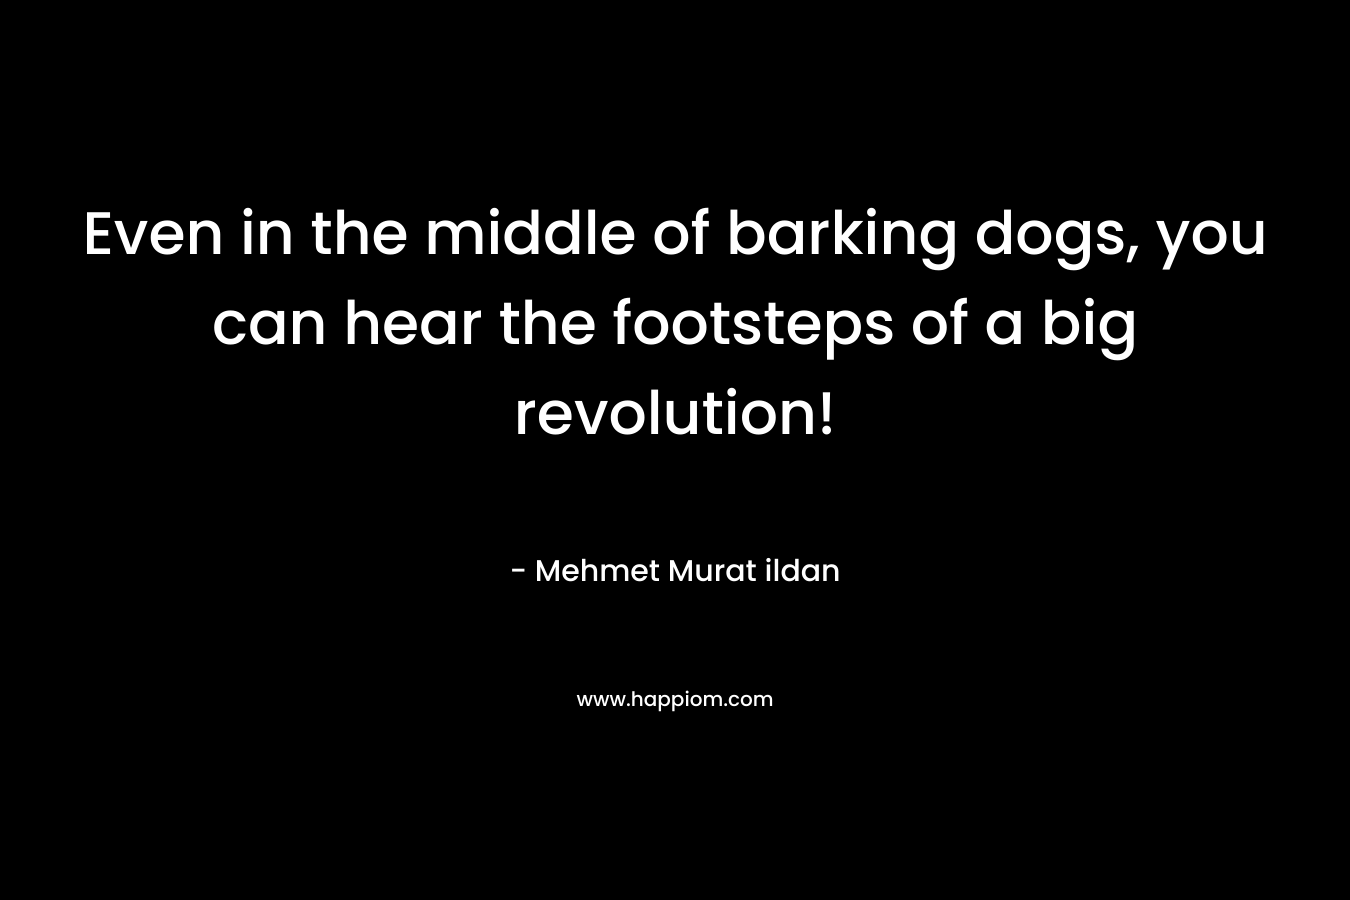 Even in the middle of barking dogs, you can hear the footsteps of a big revolution! – Mehmet Murat ildan